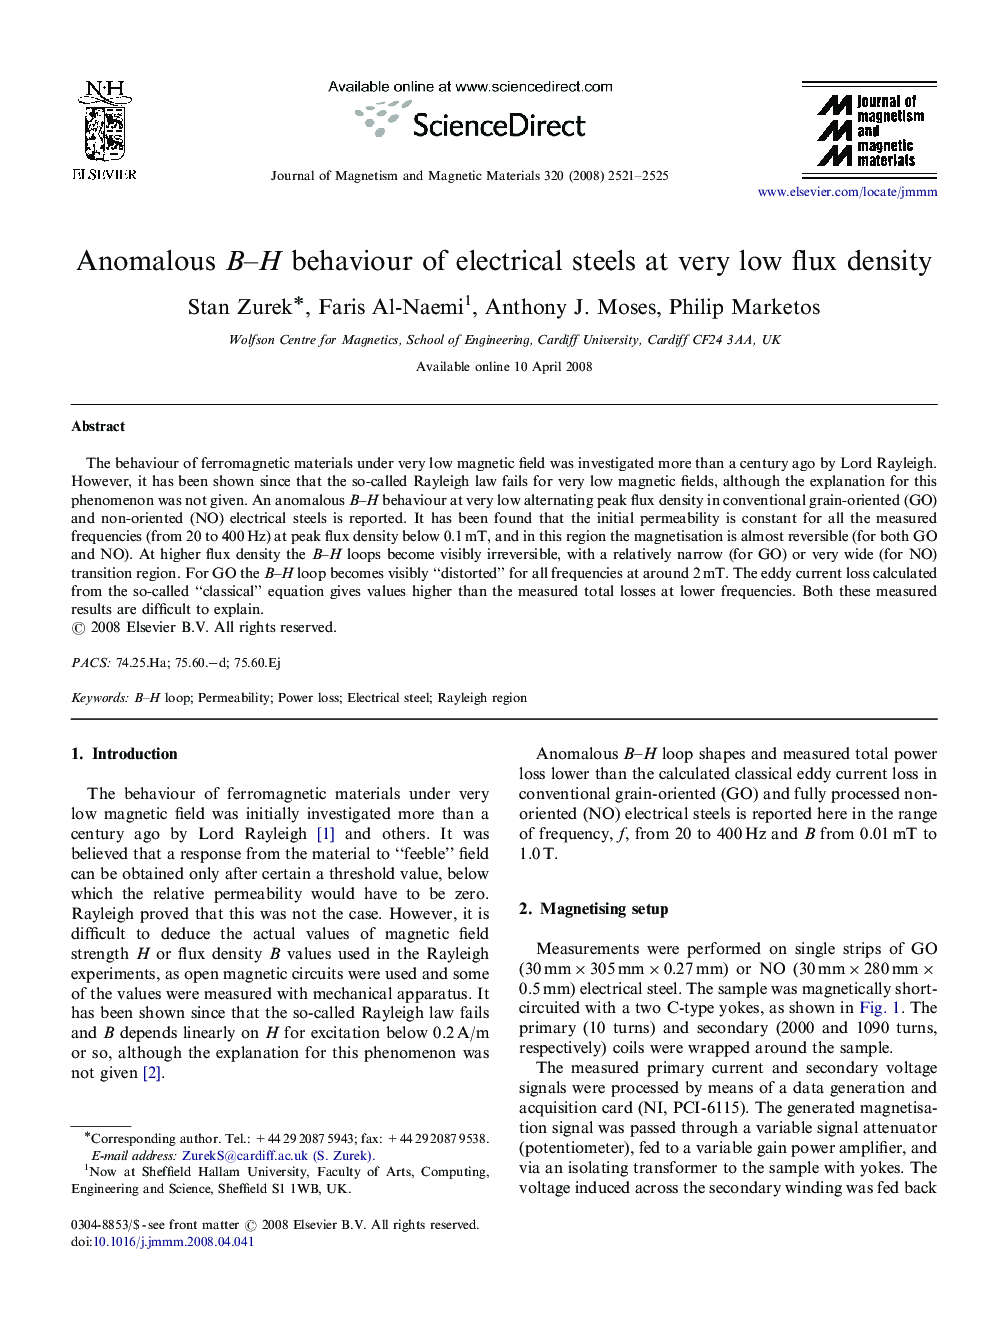 Anomalous B-H behaviour of electrical steels at very low flux density